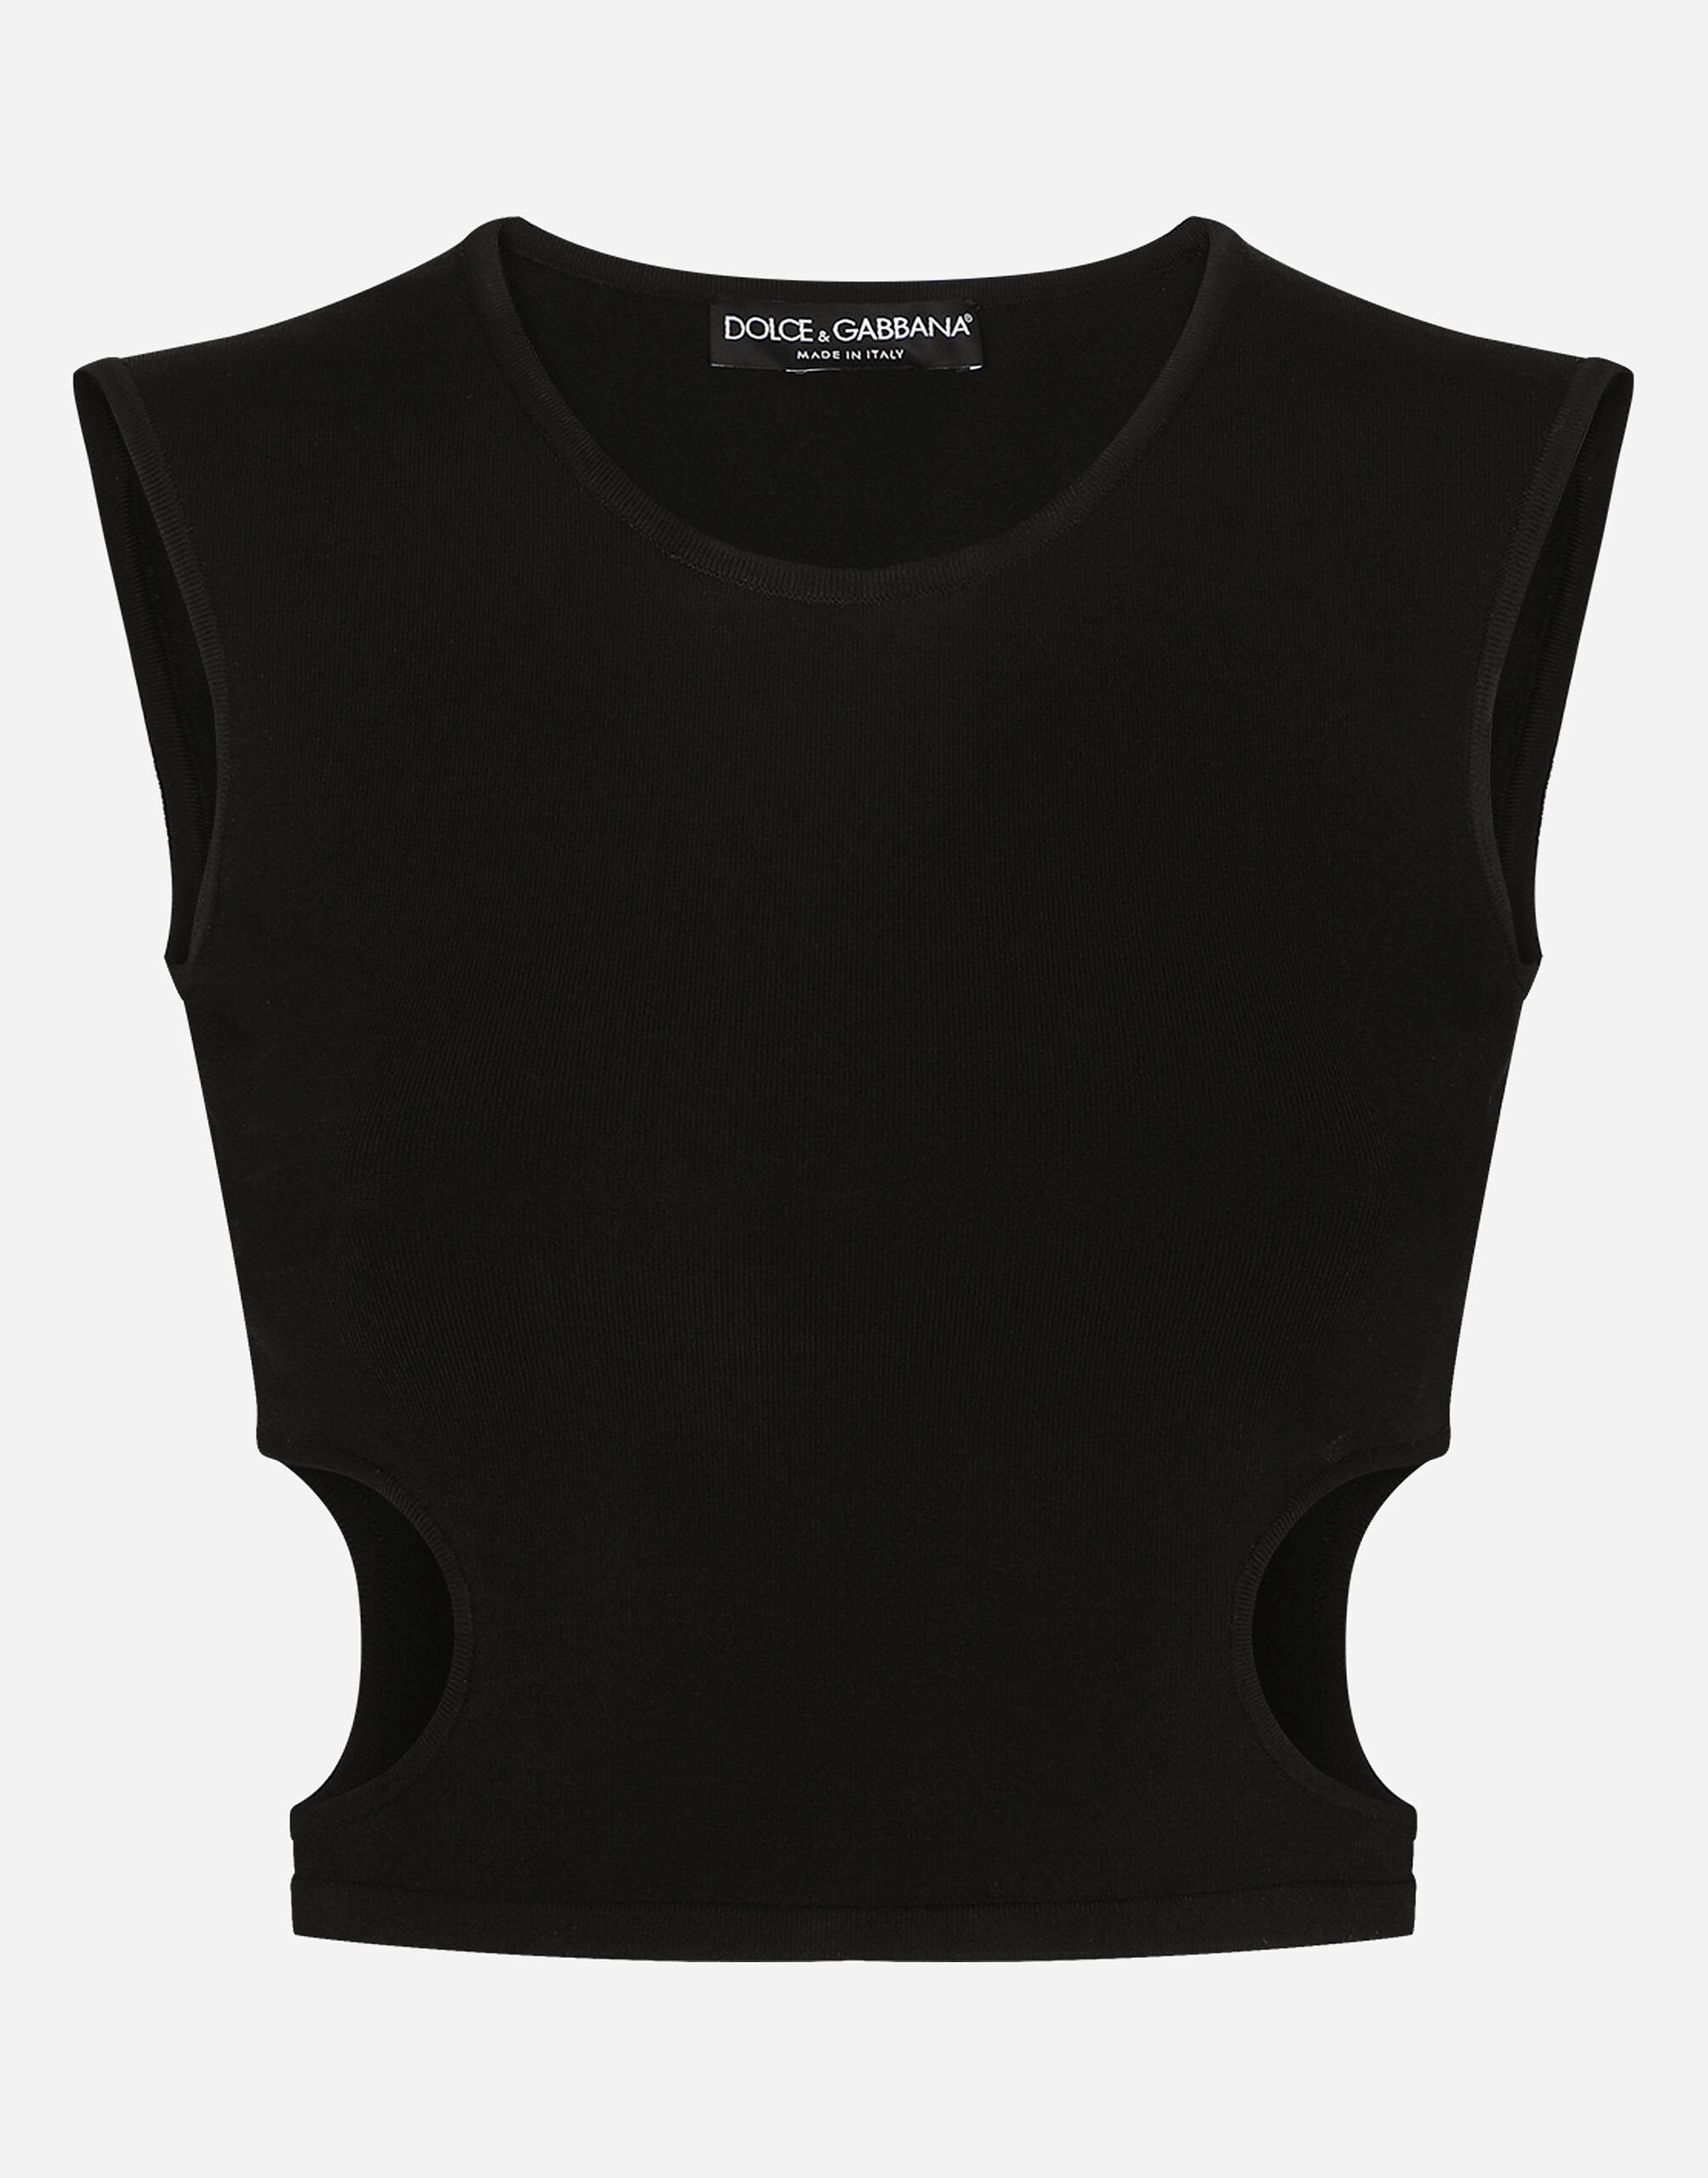 Dolce & Gabbana Viscose top with cut-out sides Black F759LTFLRC2